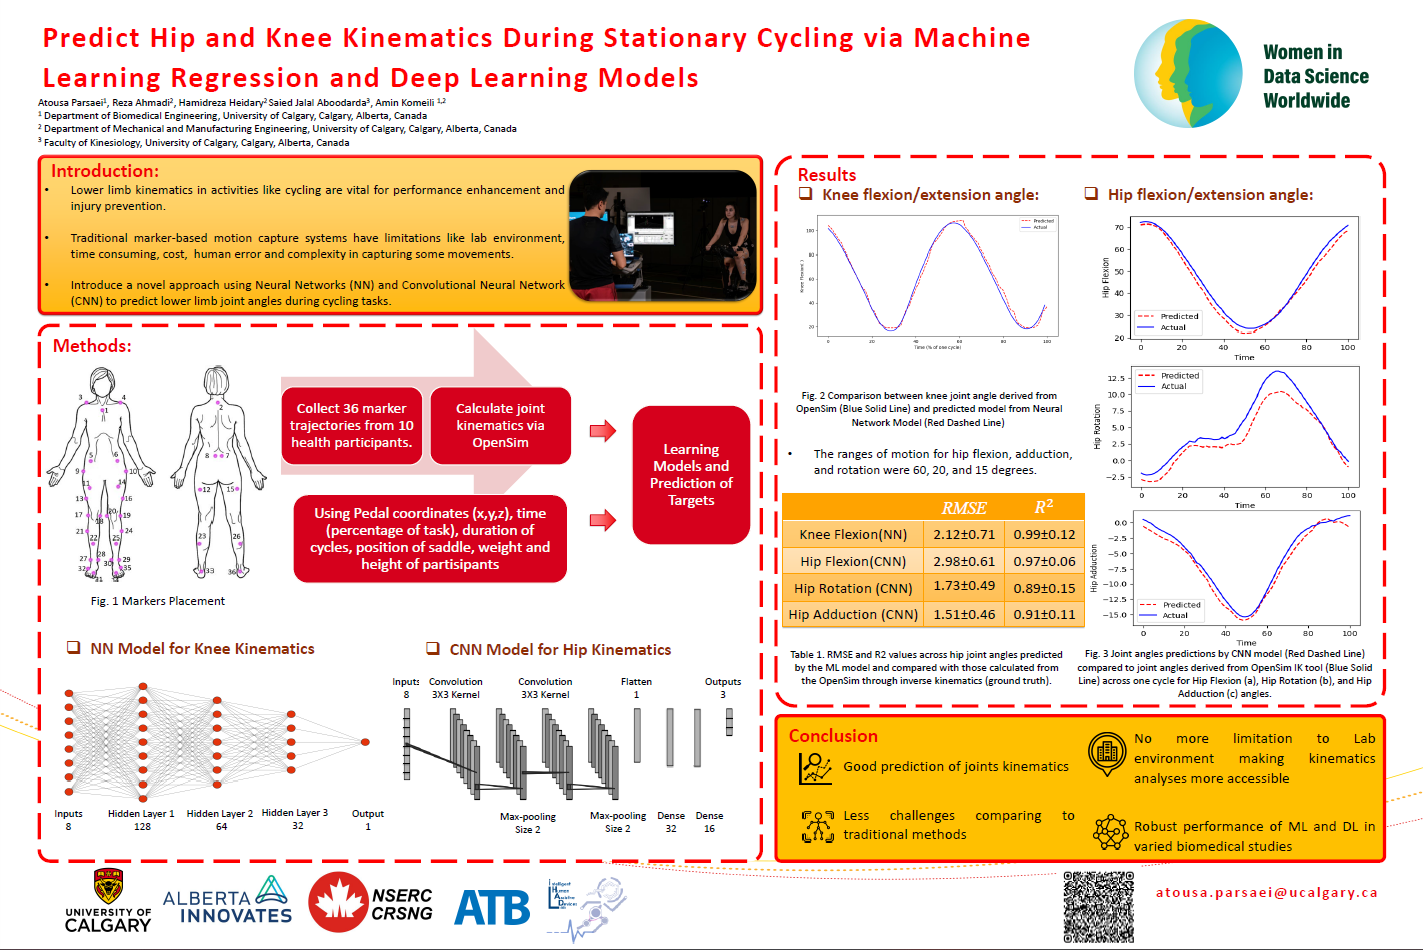 Predict Hip and Knee Kinematics During Stationary Cycling via Machine Learning Regression Models and Deep Learning Models